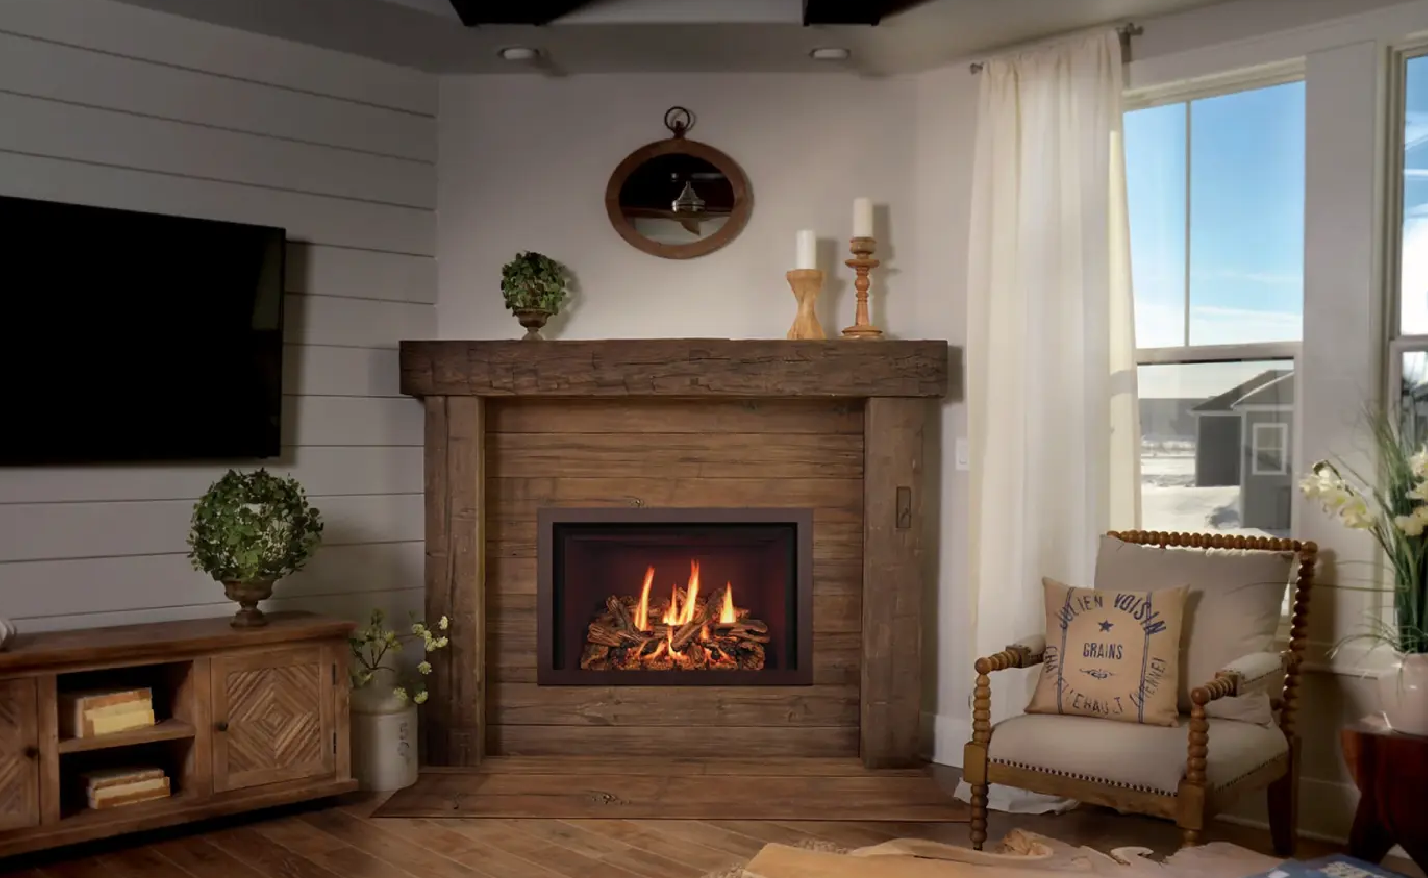 Shop for new fireplaces at Bowman's Stove & Patio